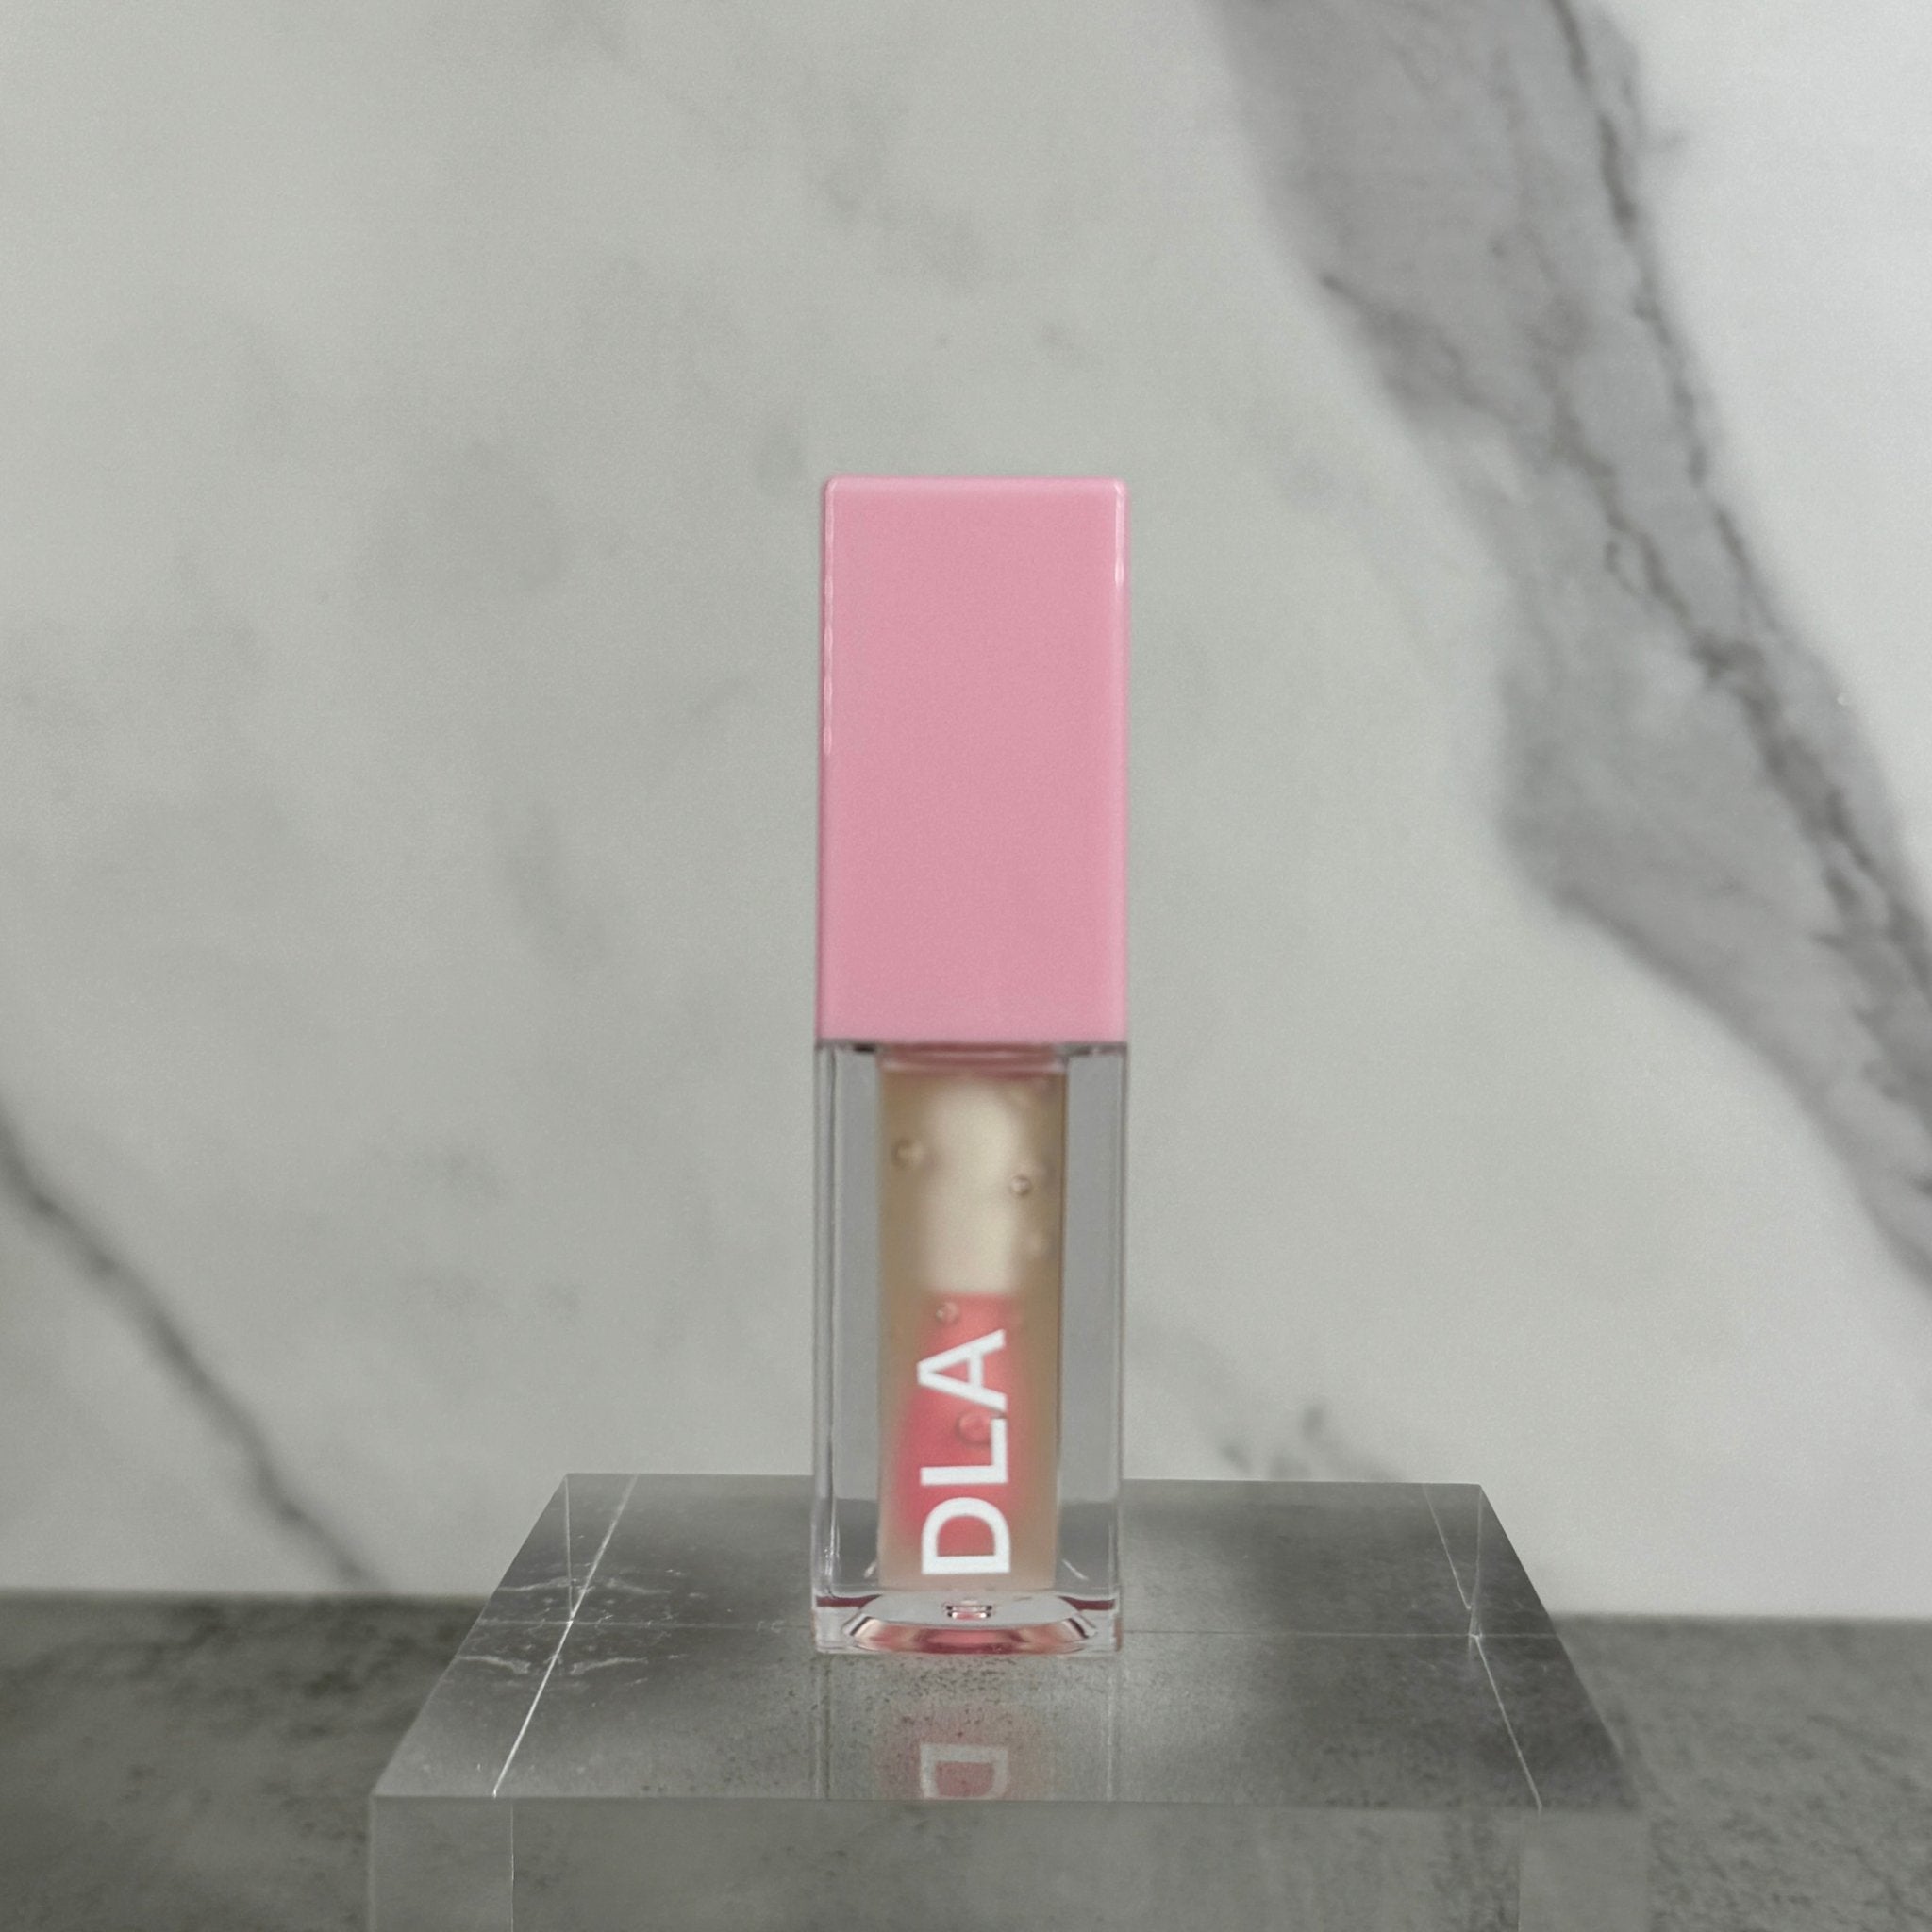 CHANGE YOUR LIFE COLOR CHANGING LIP OIL - DLA Cosmetics-Lip care products